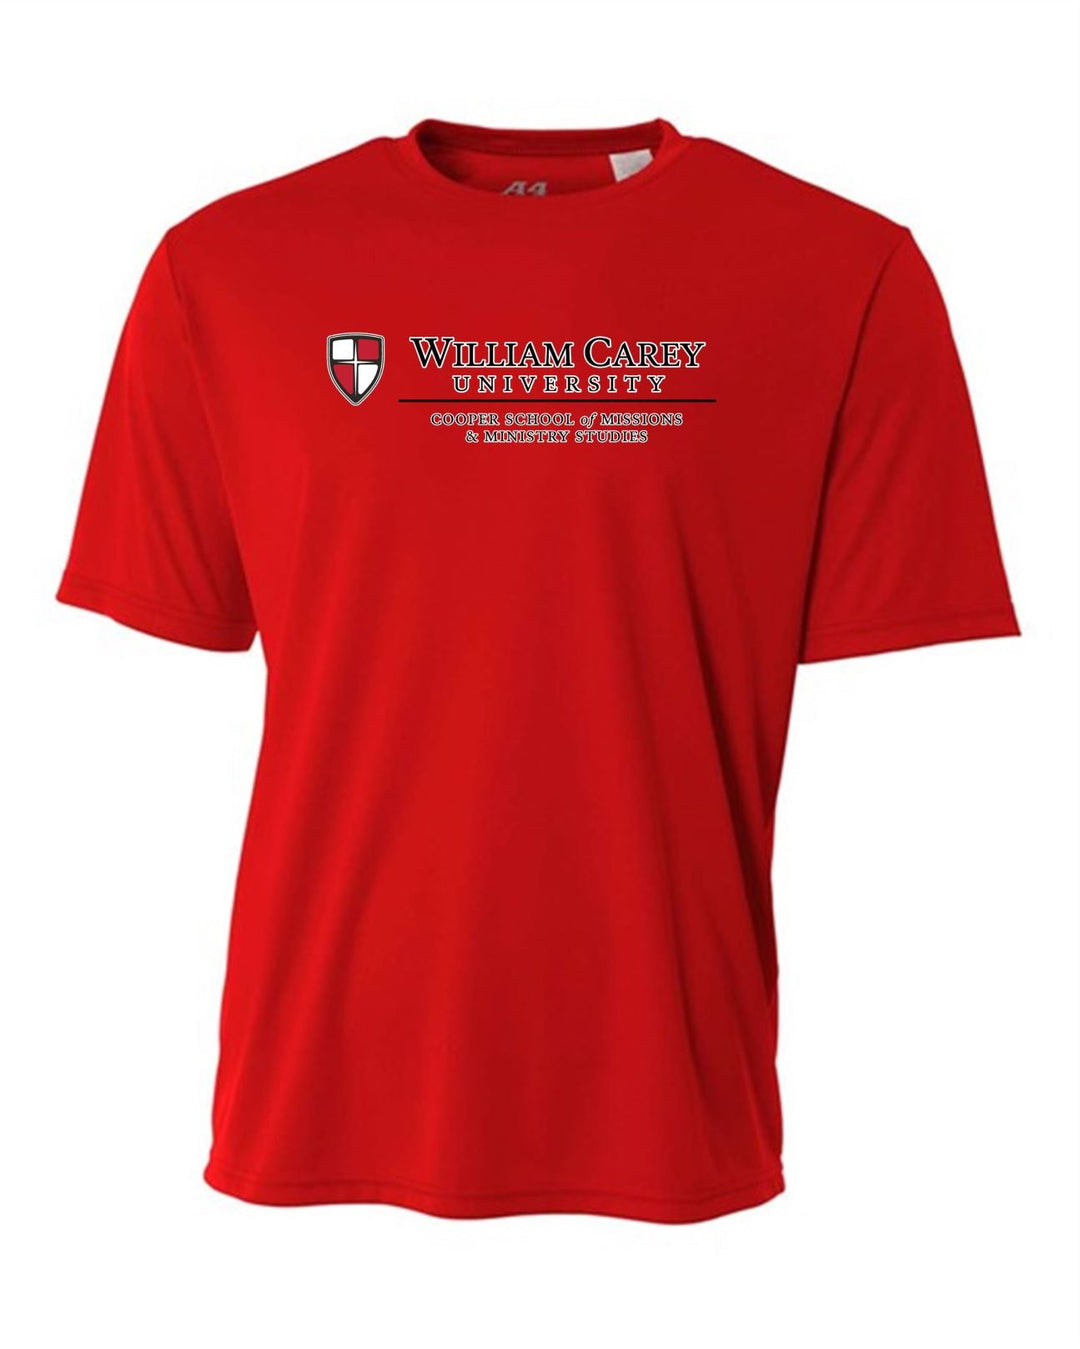 WCU Cooper School Of Missions & Ministry Youth Short-Sleeve Performance Shirt WCU CSMM Red Youth Small - Third Coast Soccer